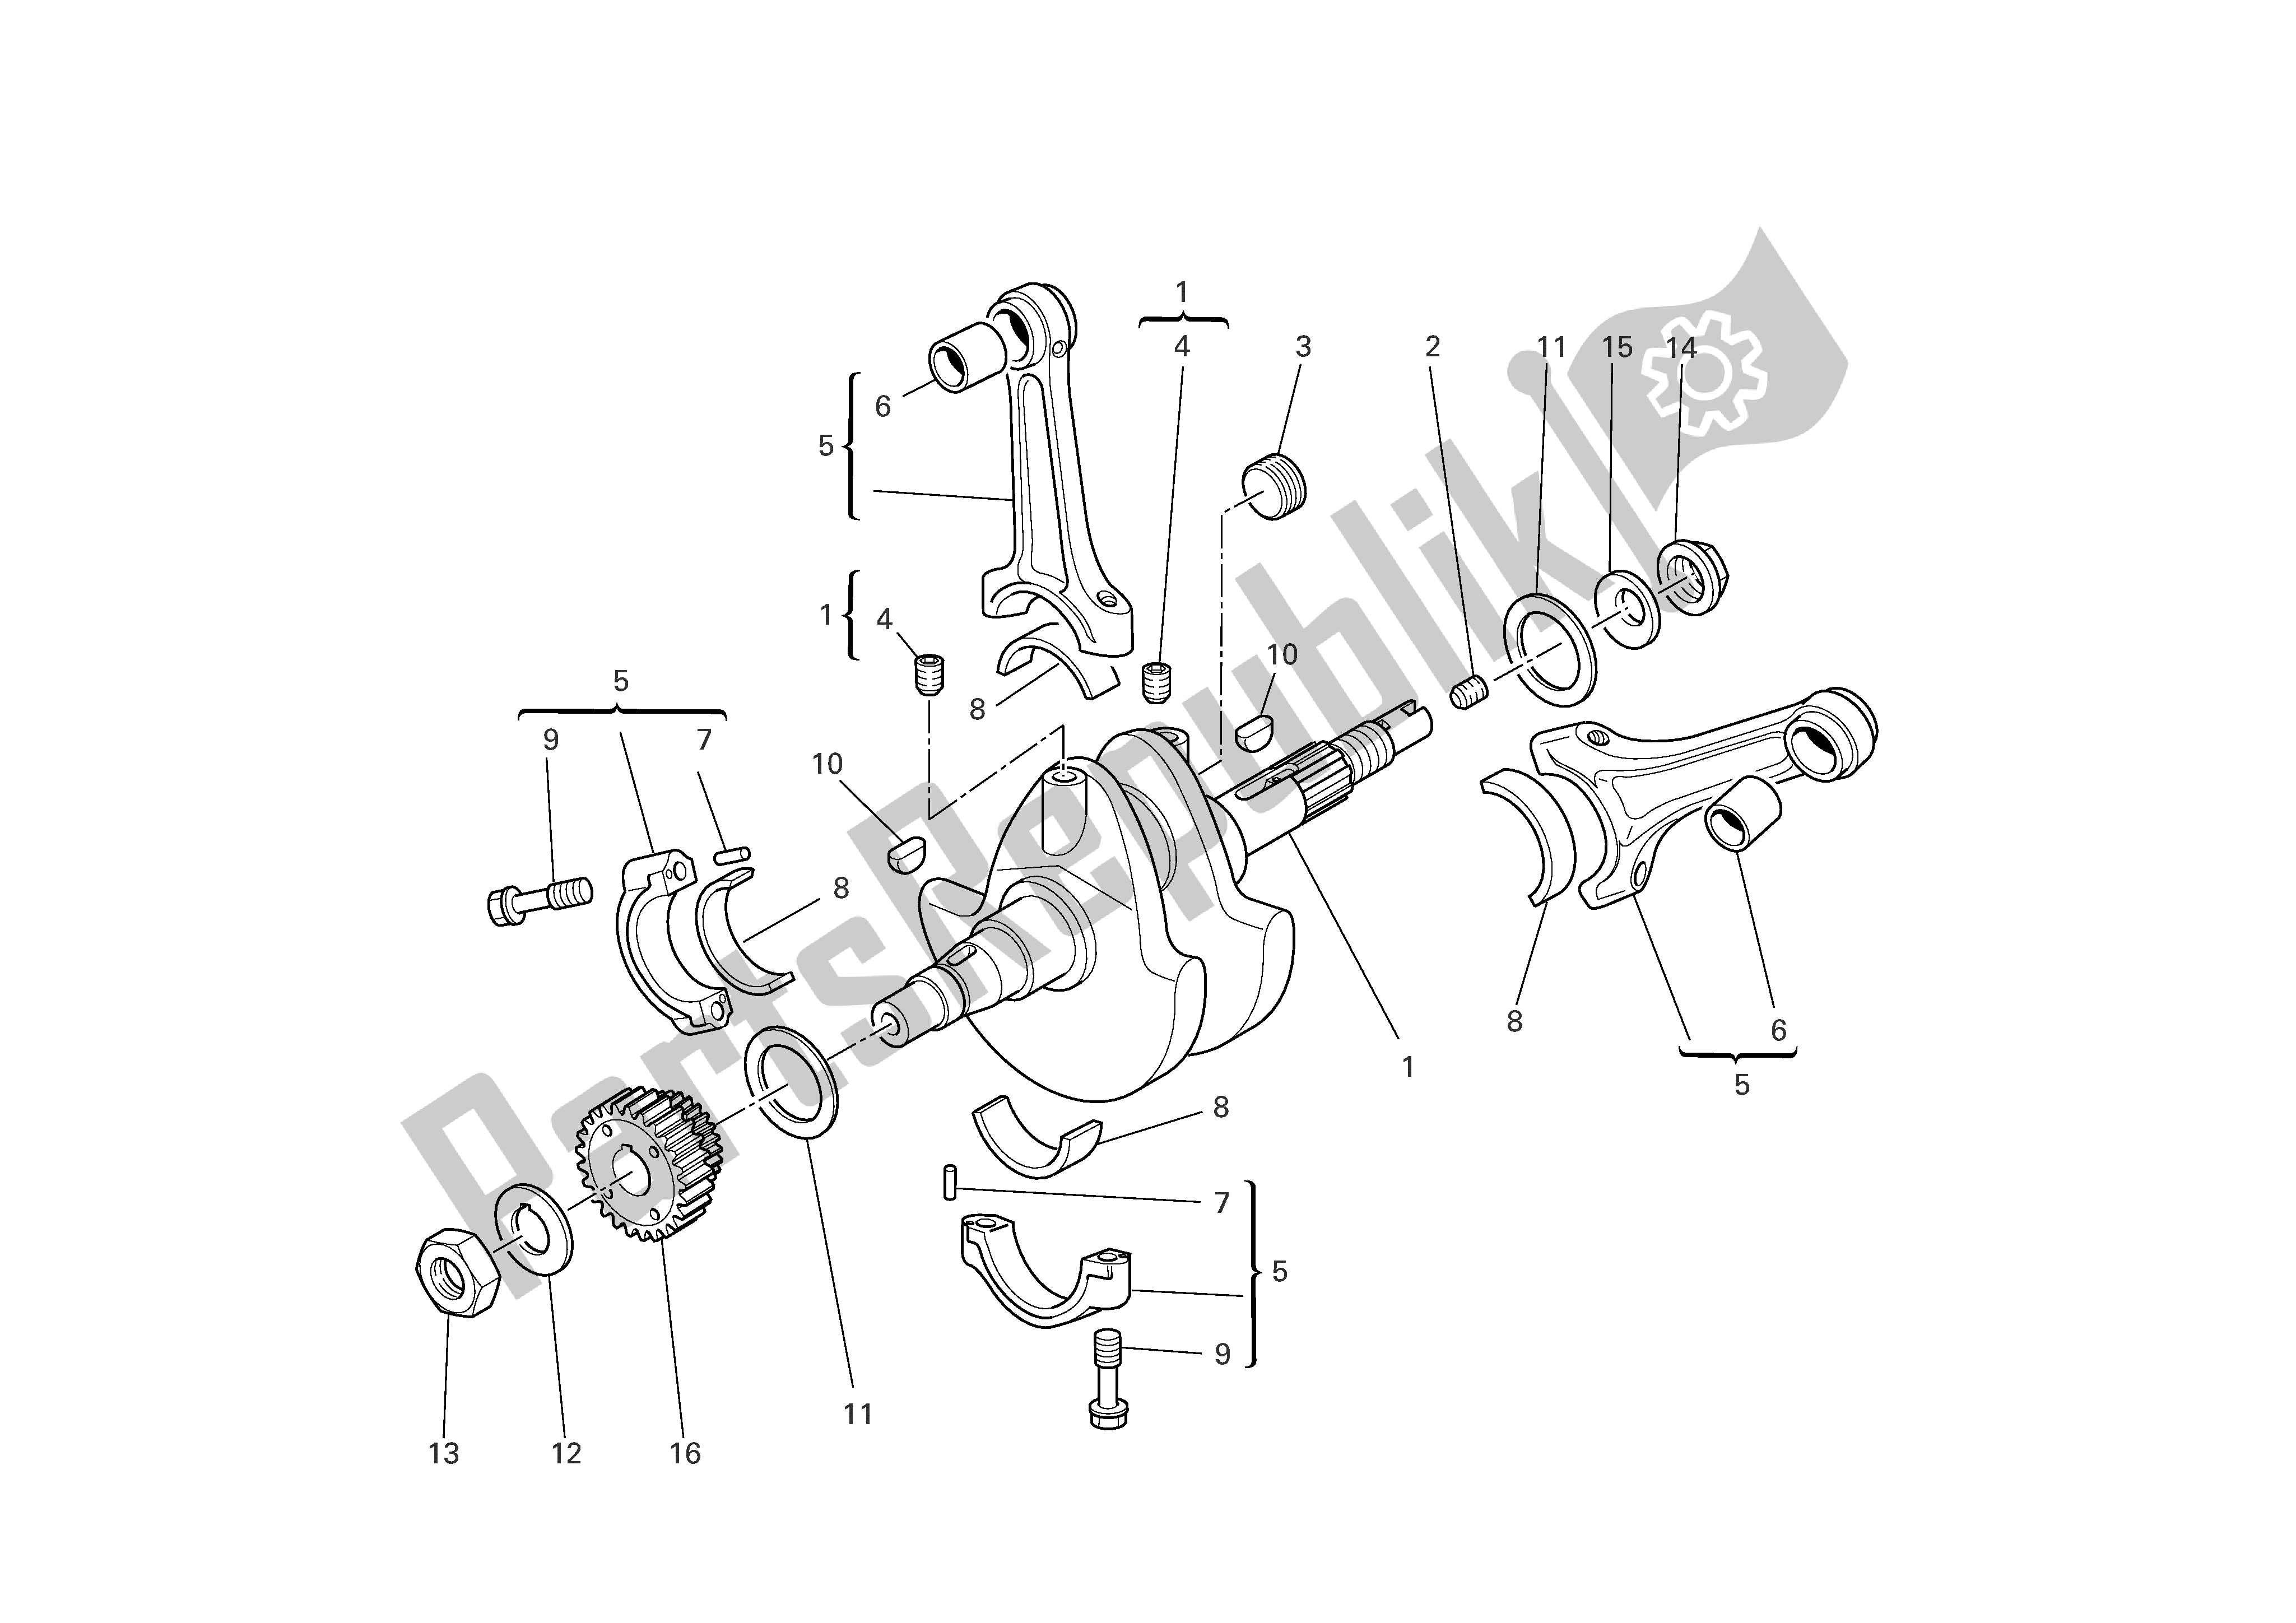 All parts for the Connecting Rods of the Ducati Monster 695 2008